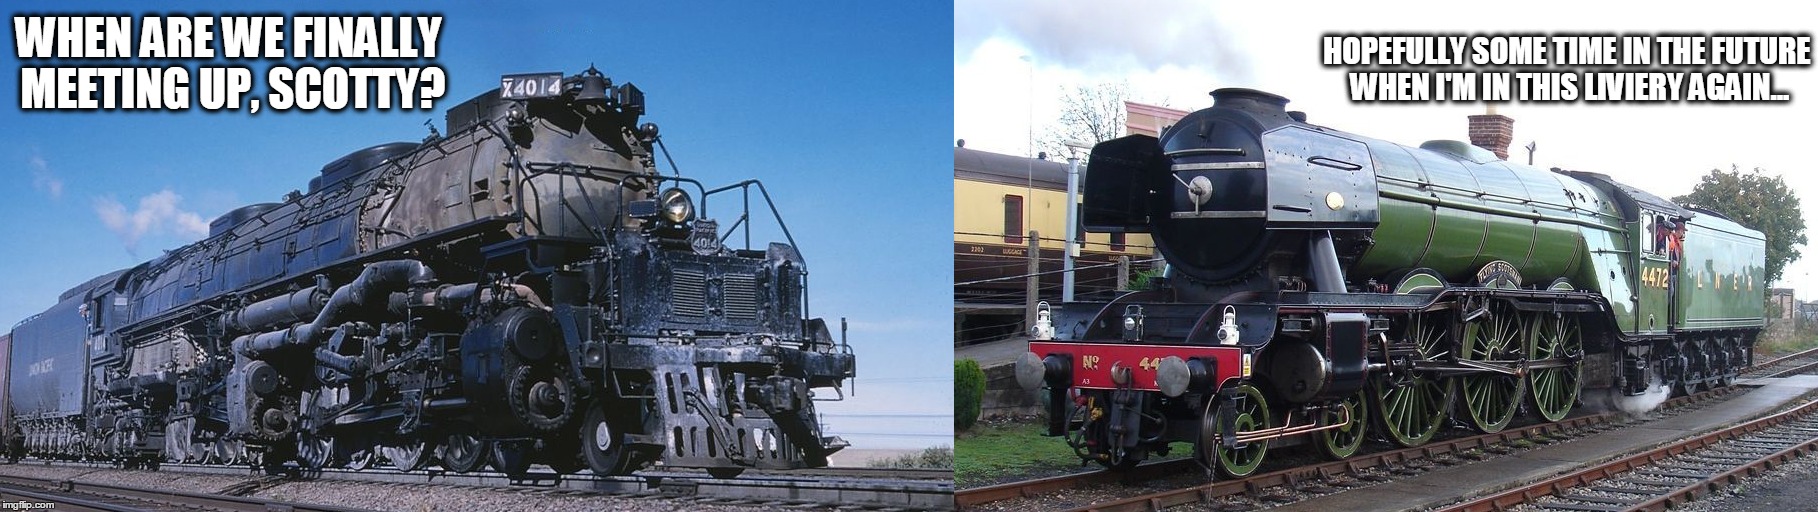 Big Boy and Flying Scotsman | HOPEFULLY SOME TIME IN THE FUTURE WHEN I'M IN THIS LIVIERY AGAIN... WHEN ARE WE FINALLY MEETING UP, SCOTTY? | image tagged in trains | made w/ Imgflip meme maker